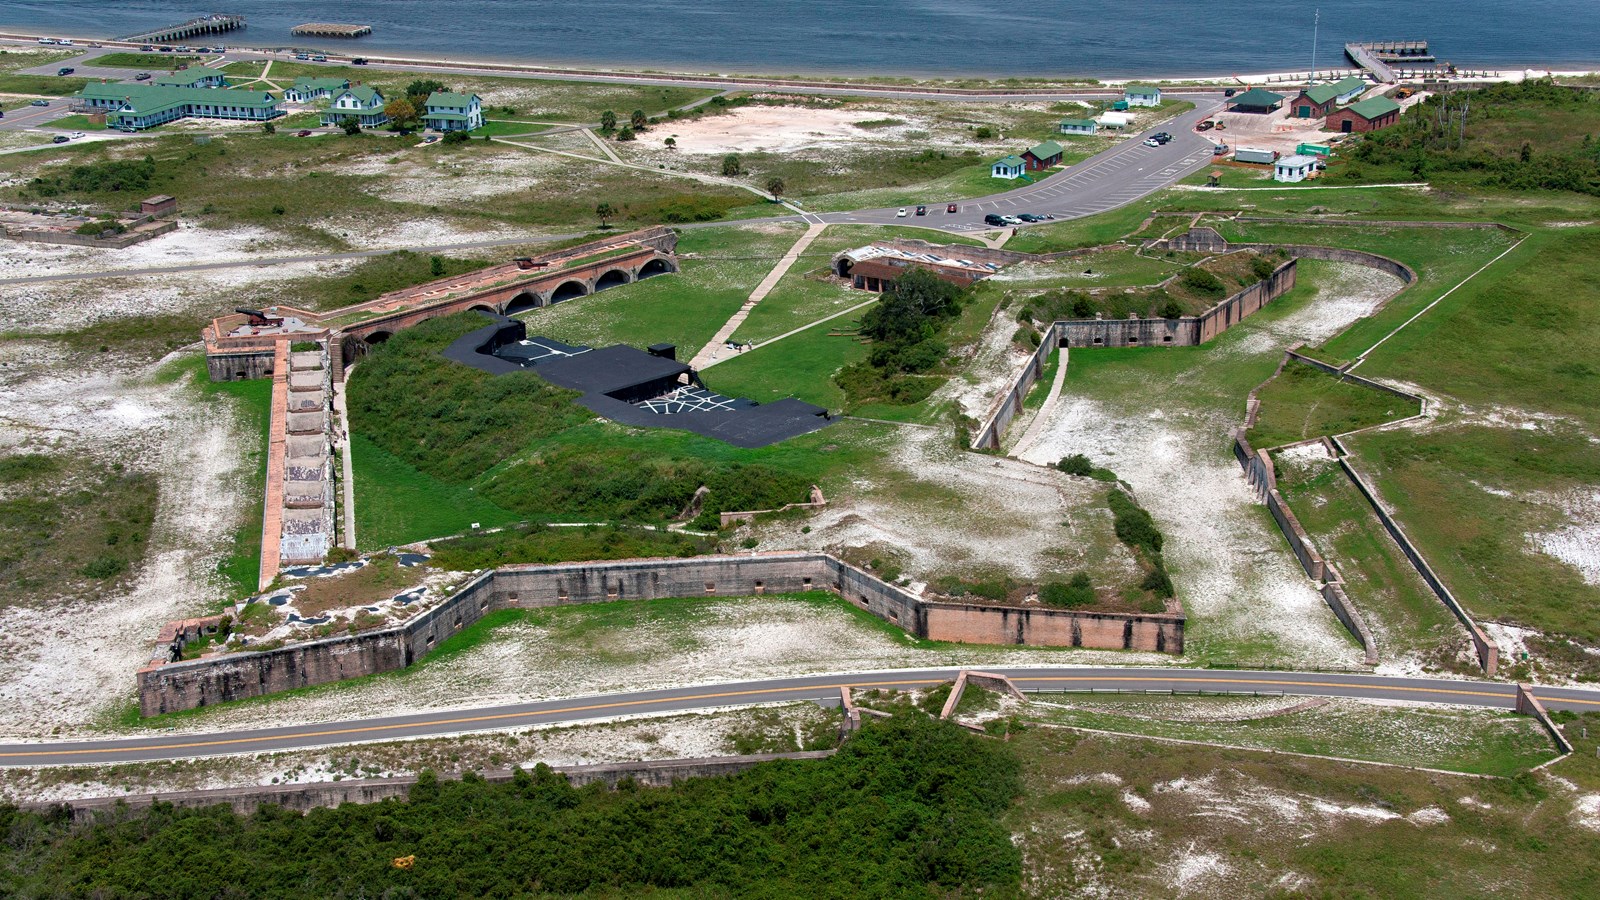 Aerial image of Fort Pickens